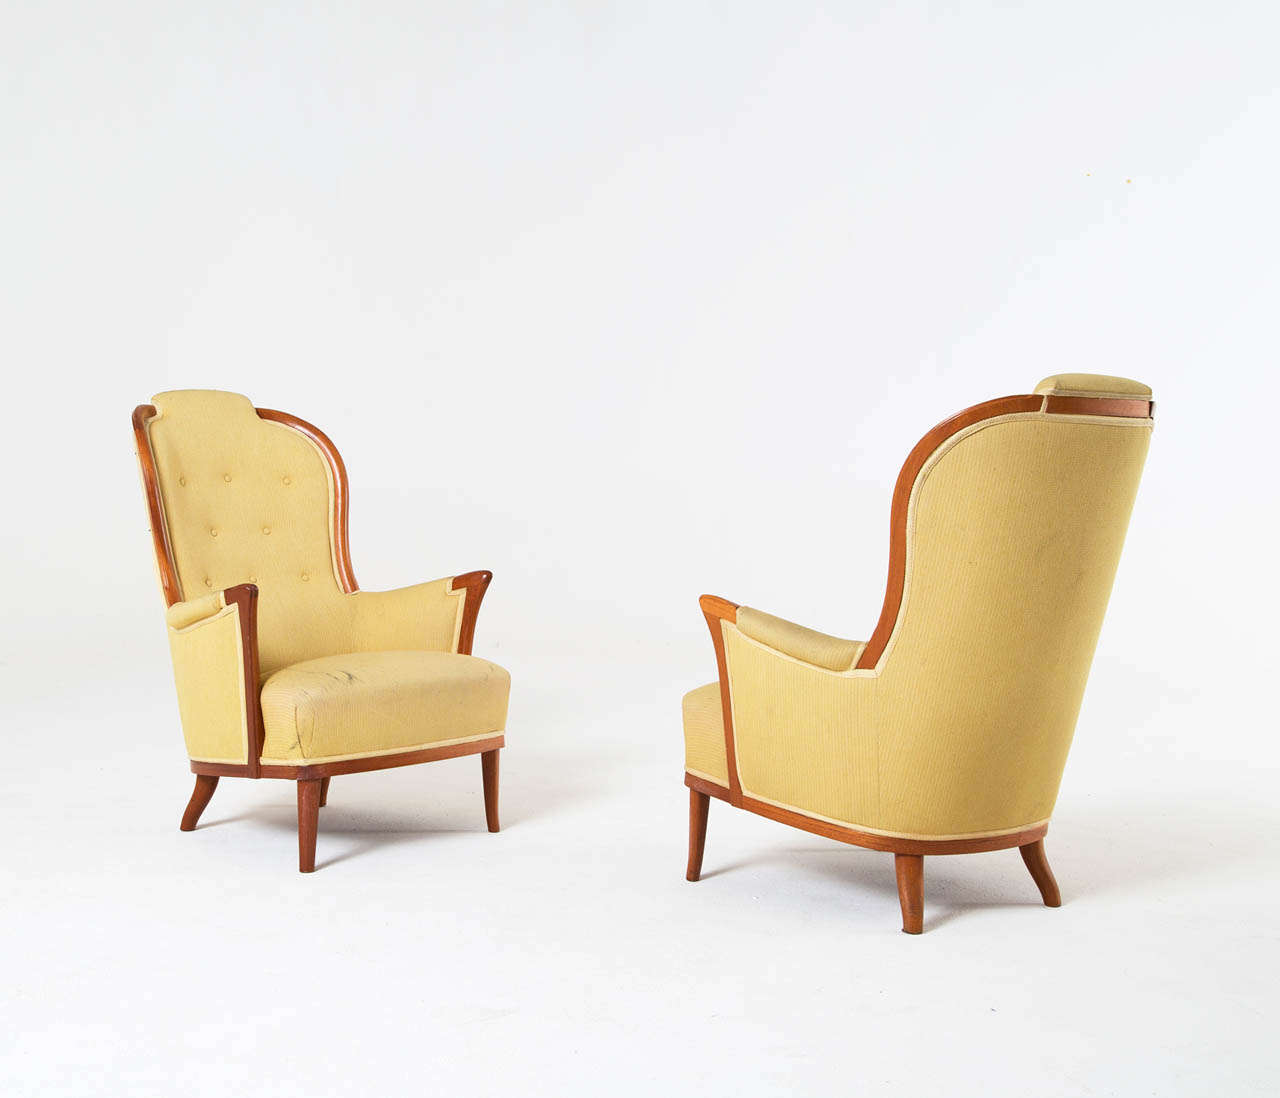 Very interesting pair of Swedish loungechairs by Carl Malmsten in their original upholstery with tufted back. 

The unique lines and curves of the design are striking and the small tapered legs complements its shapes beautifully, but it's also